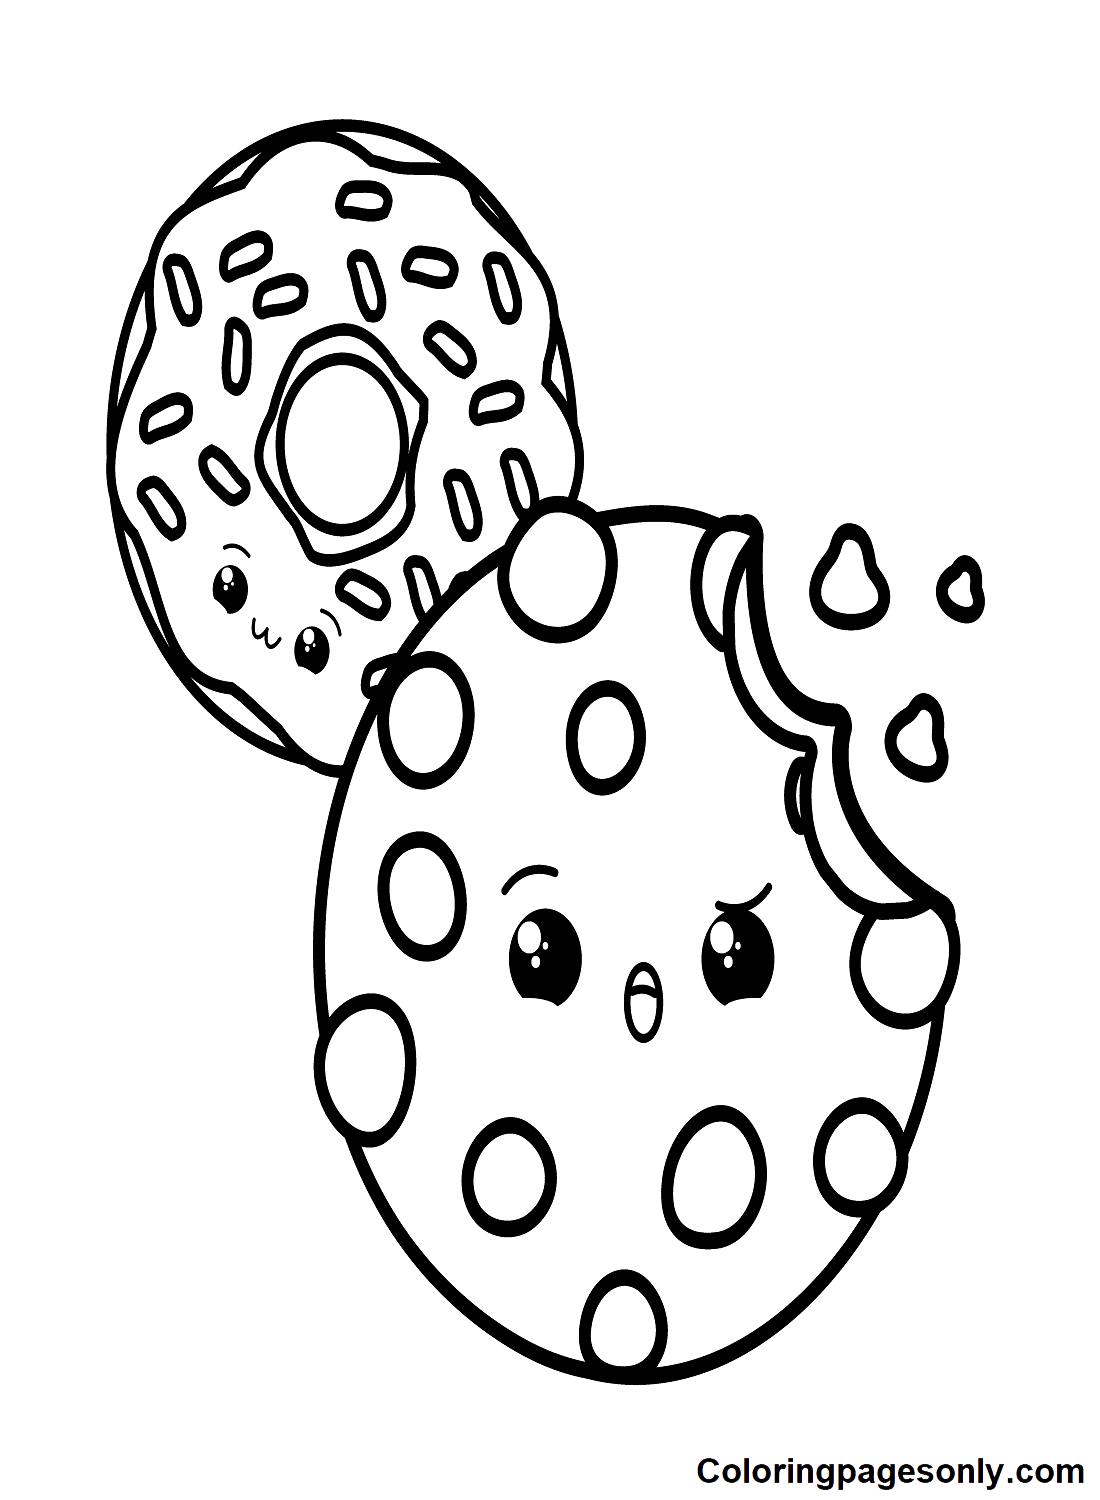 Cookie and Donut Coloring Pages